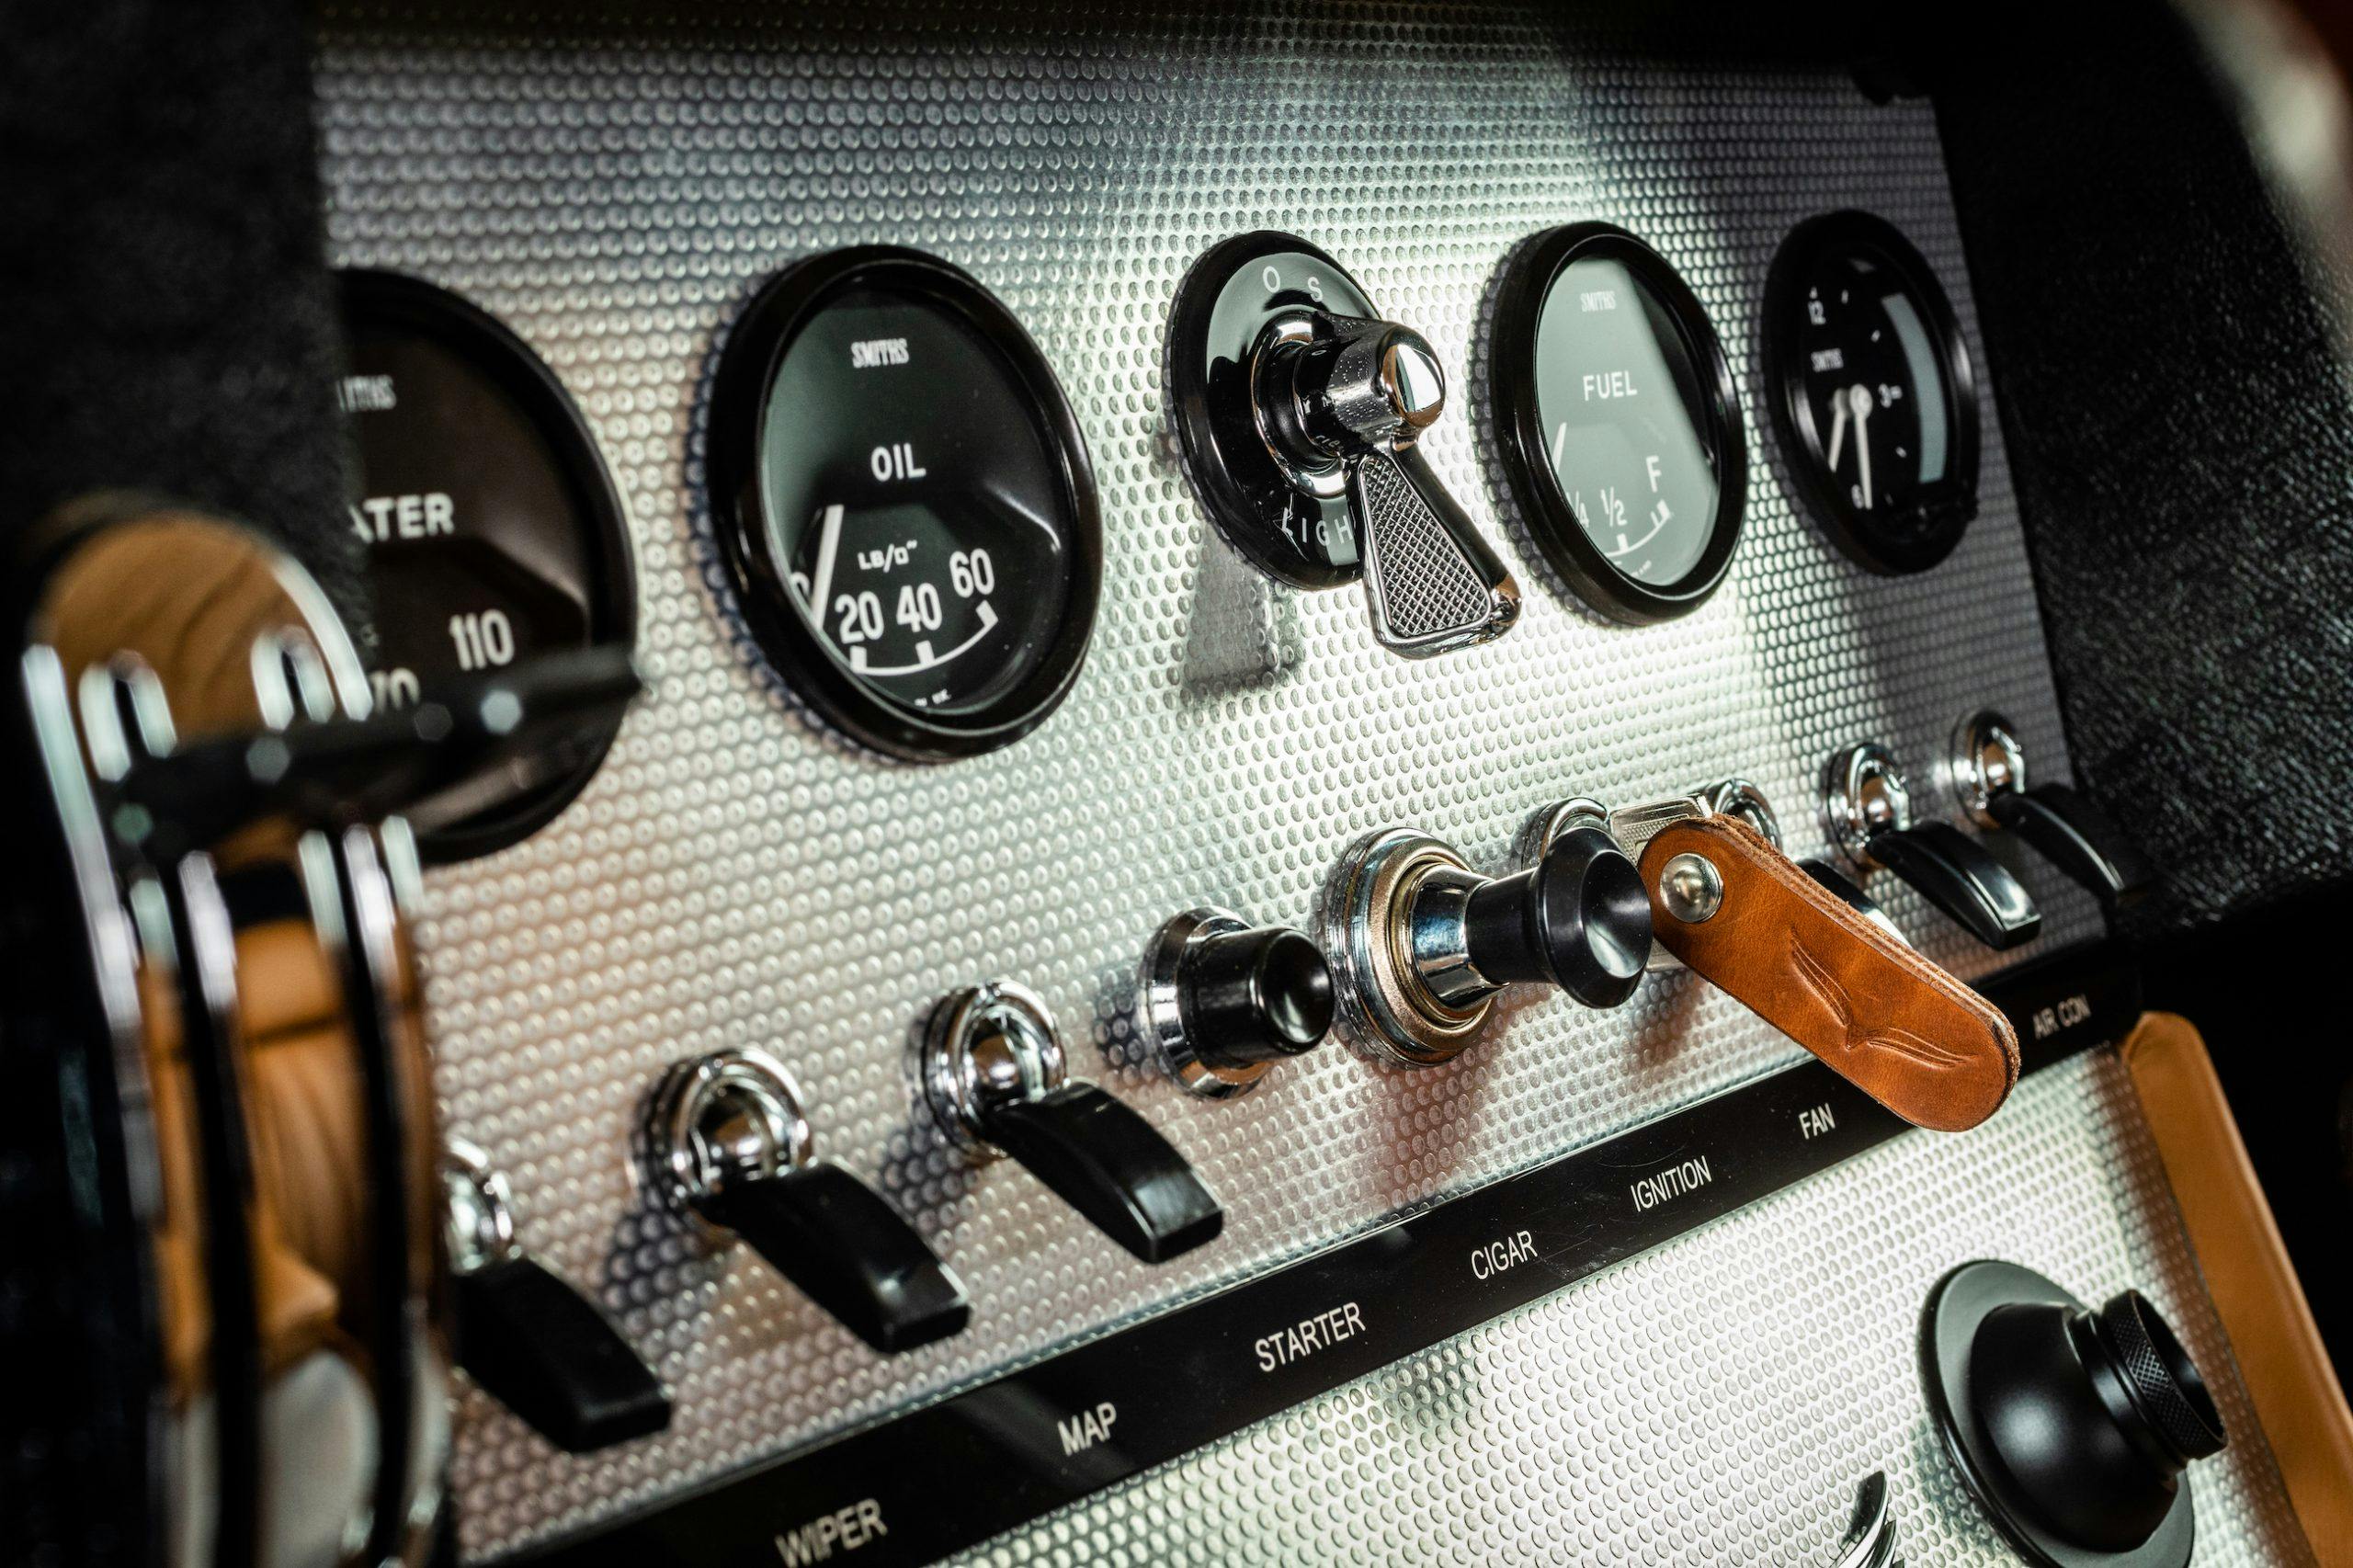 Eagle E-type Lightweight GT Knobs And Levers